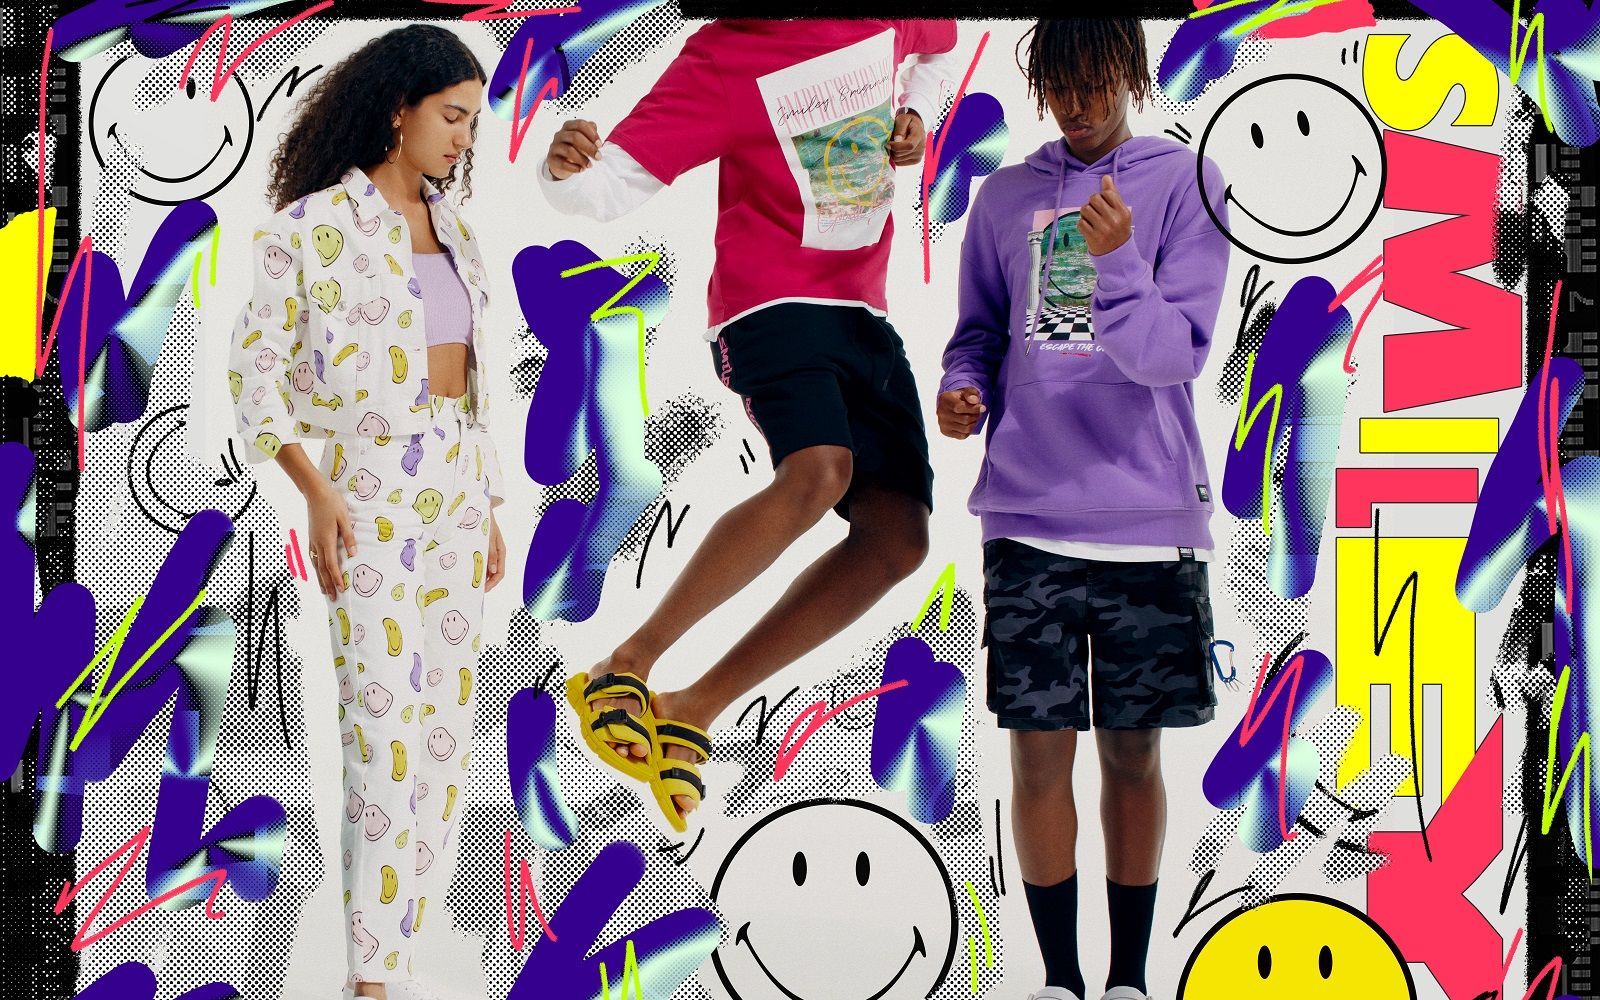 The new Smiley x Pull&Bear collection